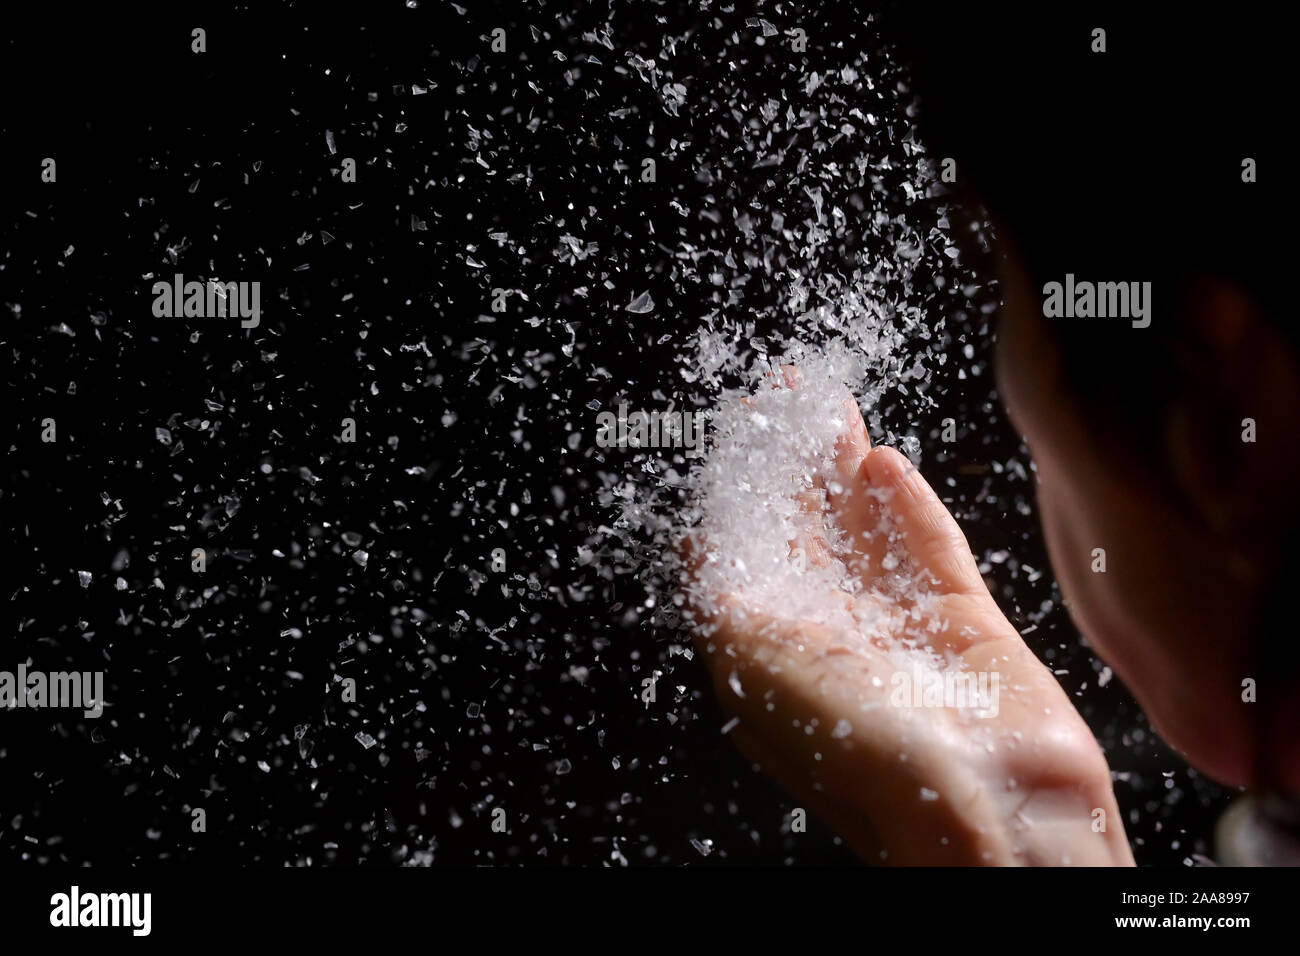 Woman Blowing Fake Snow in The Dark Stock Photo